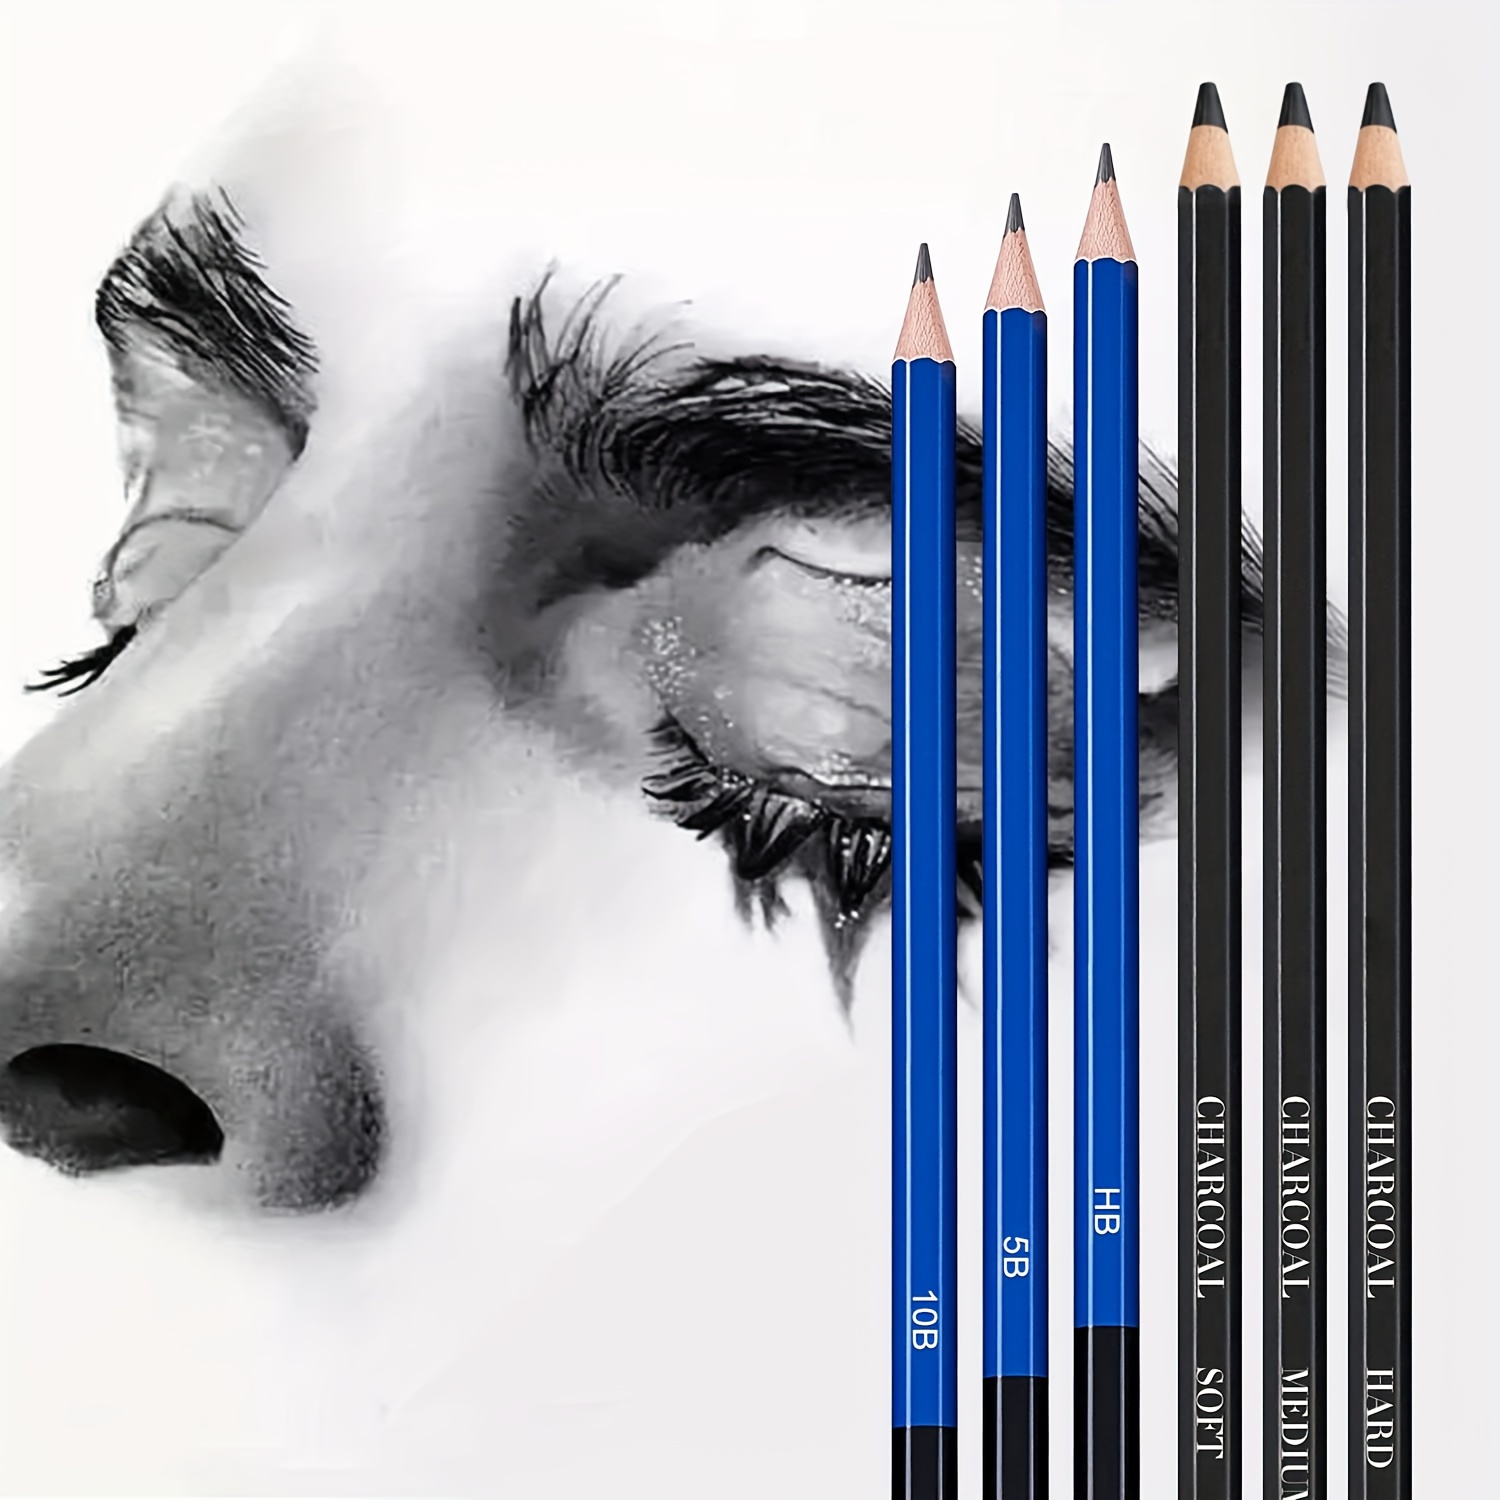 Sketch pencil set 40 Pcs, Professional pencils for Sketching Drawing Kit  Including Graphite Charcoal Willow Sticks Erasers Sharpeners with Carry  Bag, Art Supplies Students draw ~ Premify